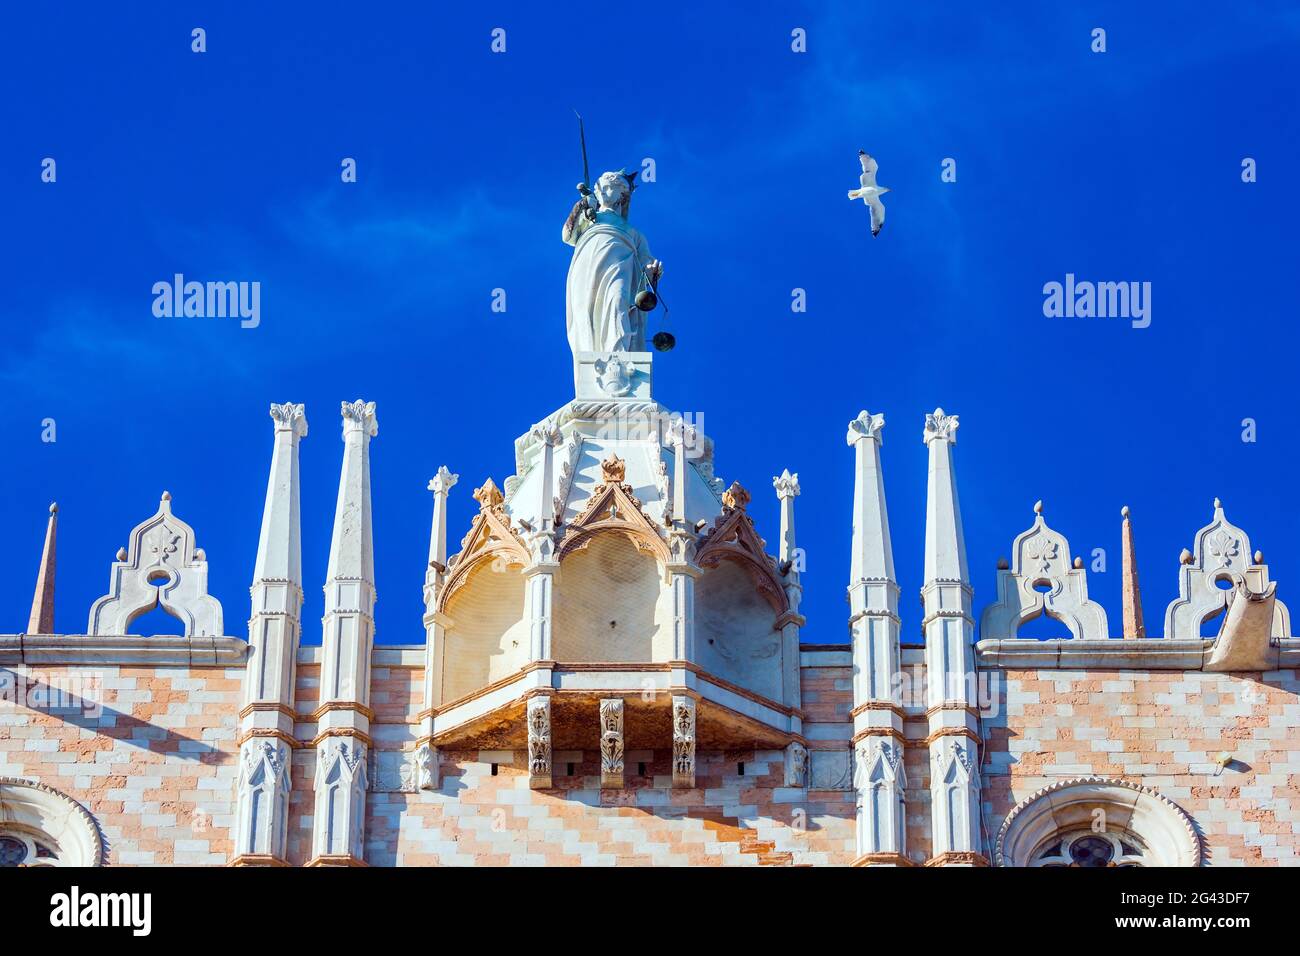 The facade of the Doge's Palace Stock Photo